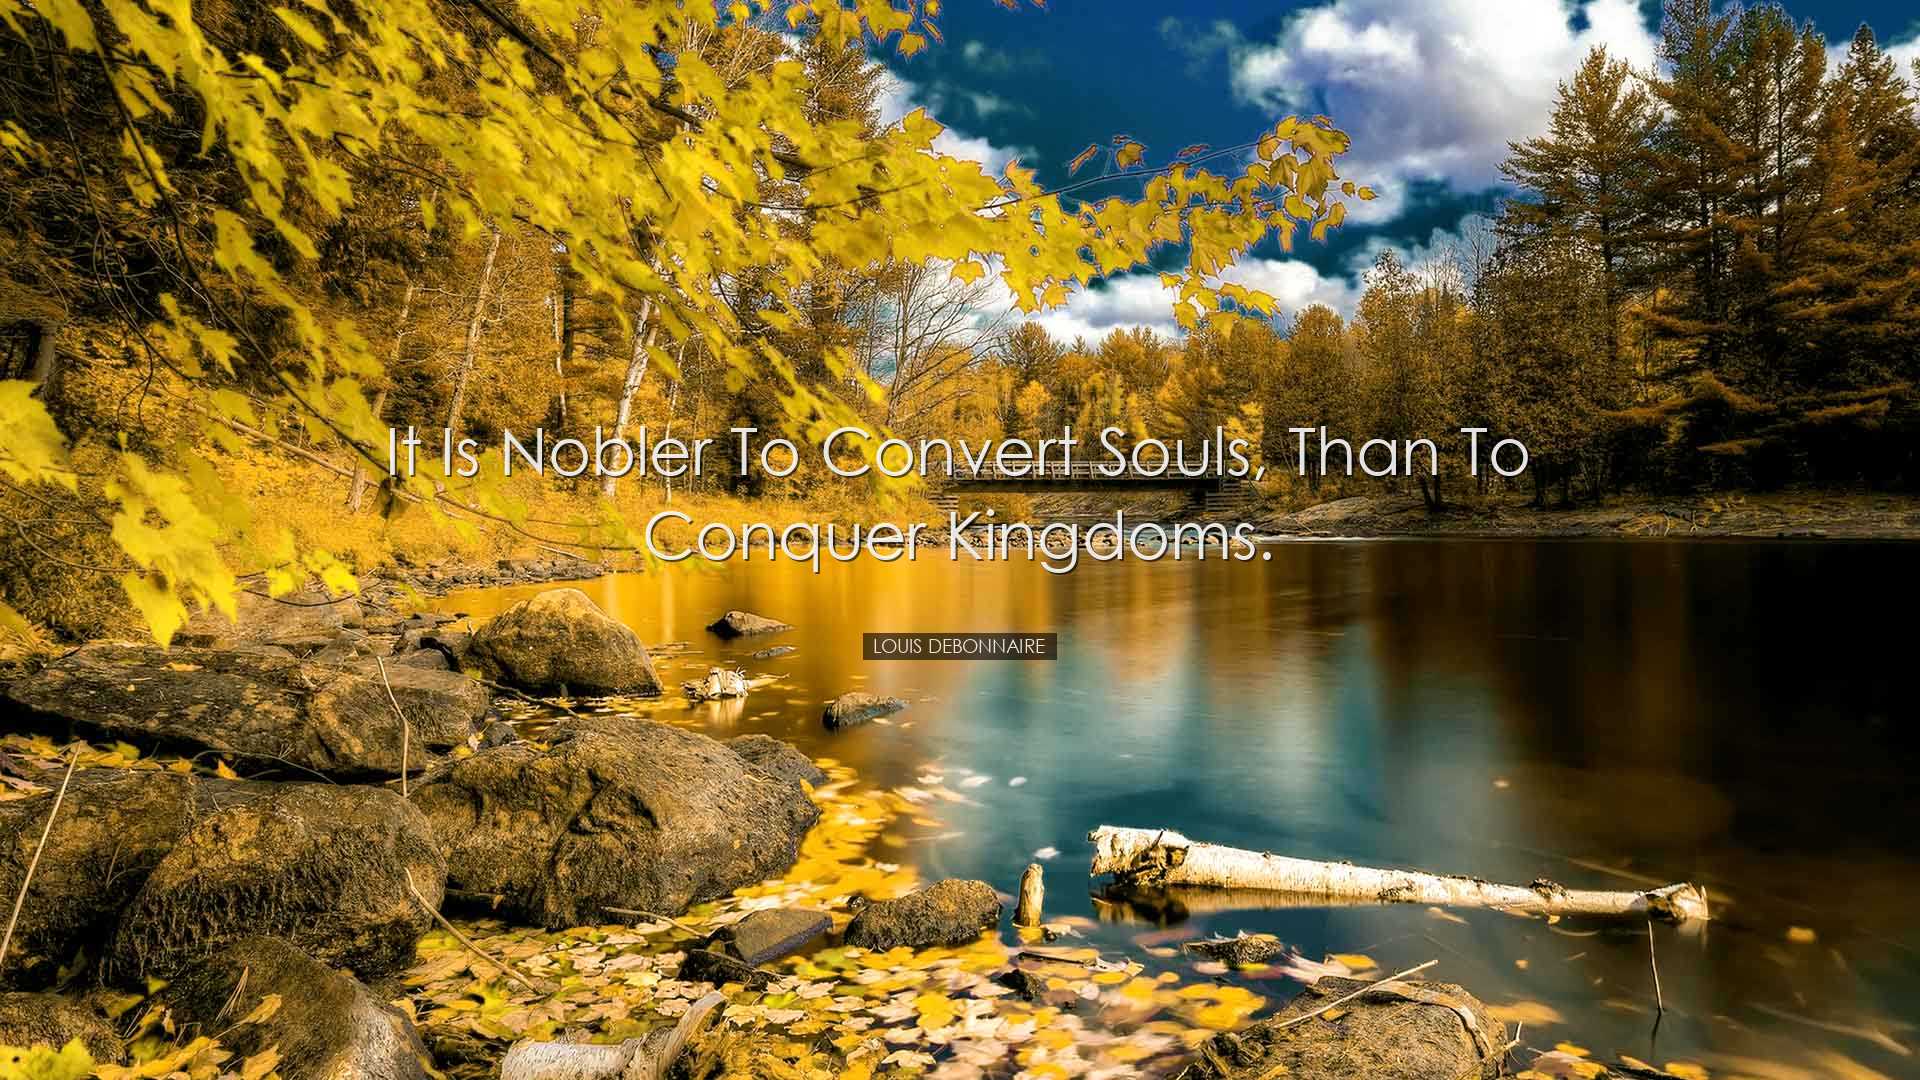 It is nobler to convert souls, than to conquer kingdoms. - Louis D